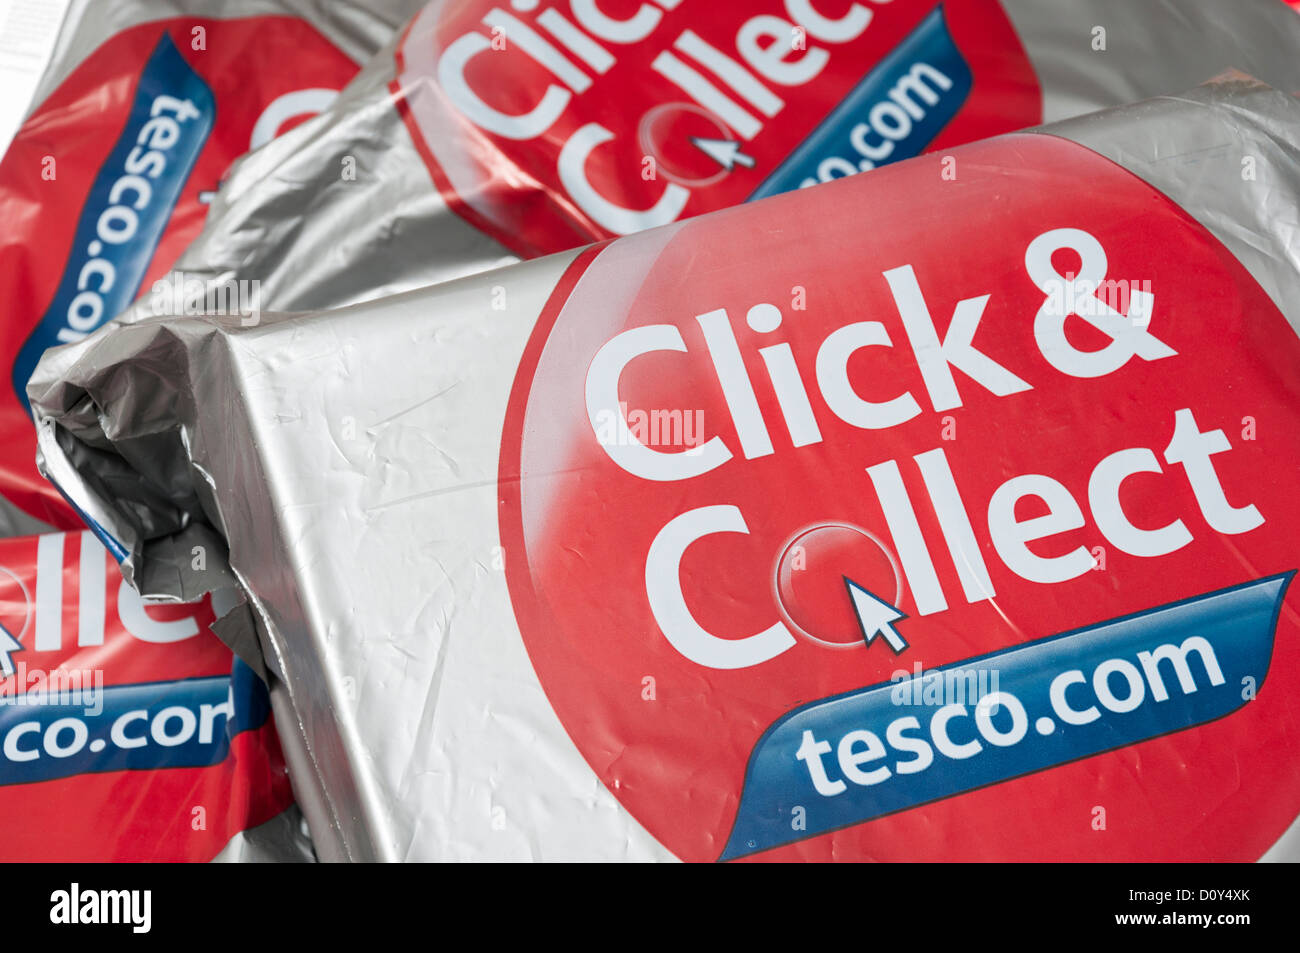 Tesco Click and Collect parcels. Stock Photo